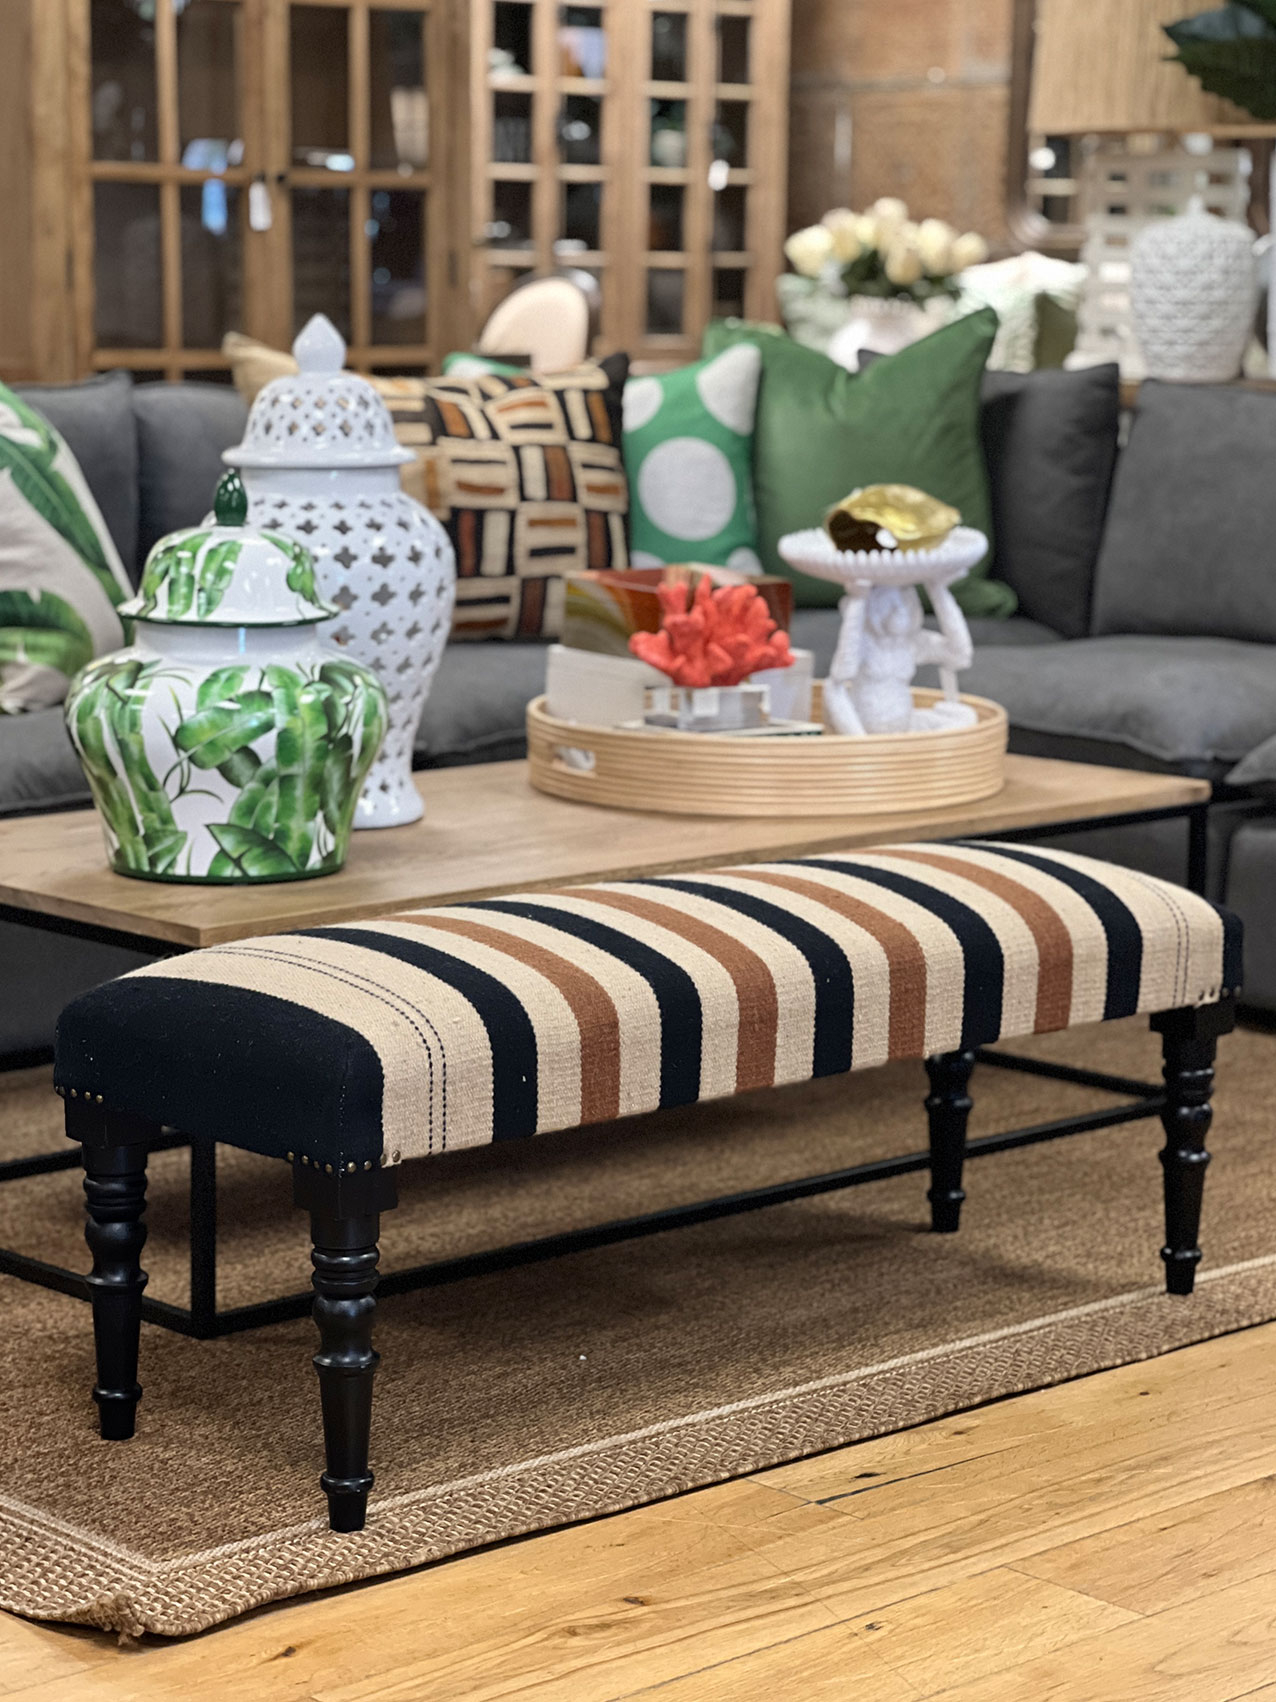 stripe upholstered ottoman with turned legs